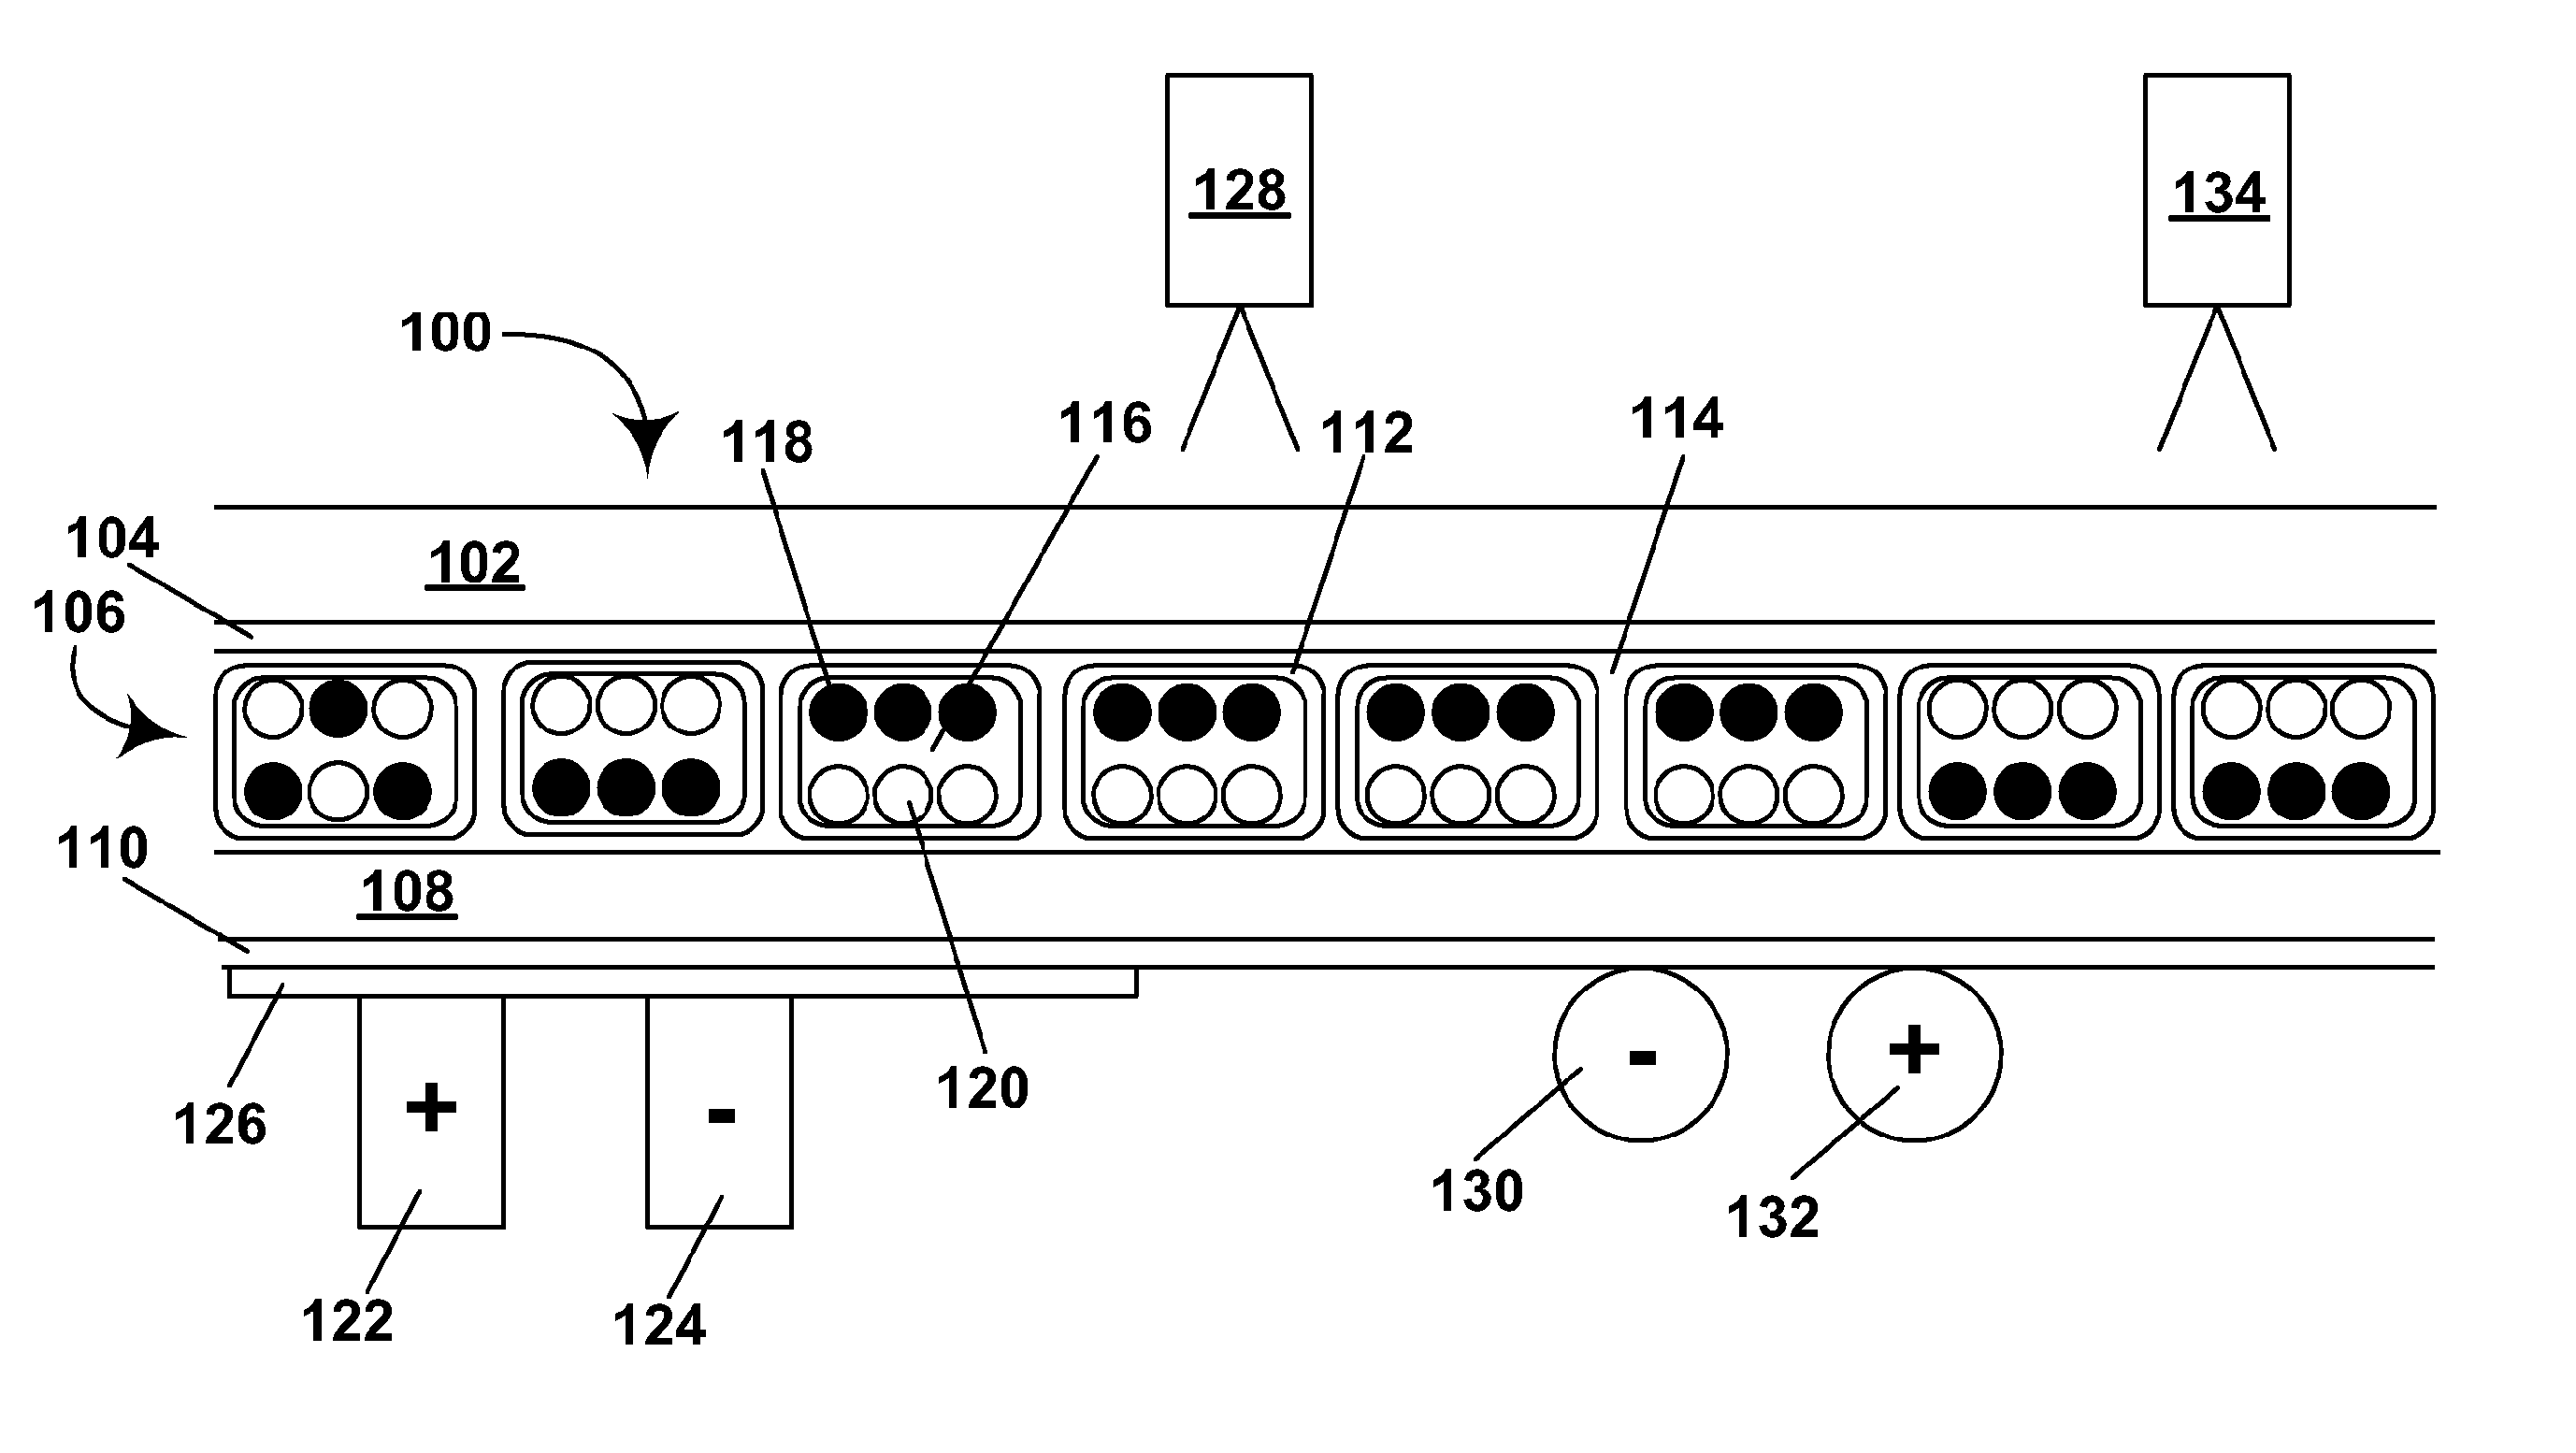 Components and testing methods for use in the production of electro-optic displays